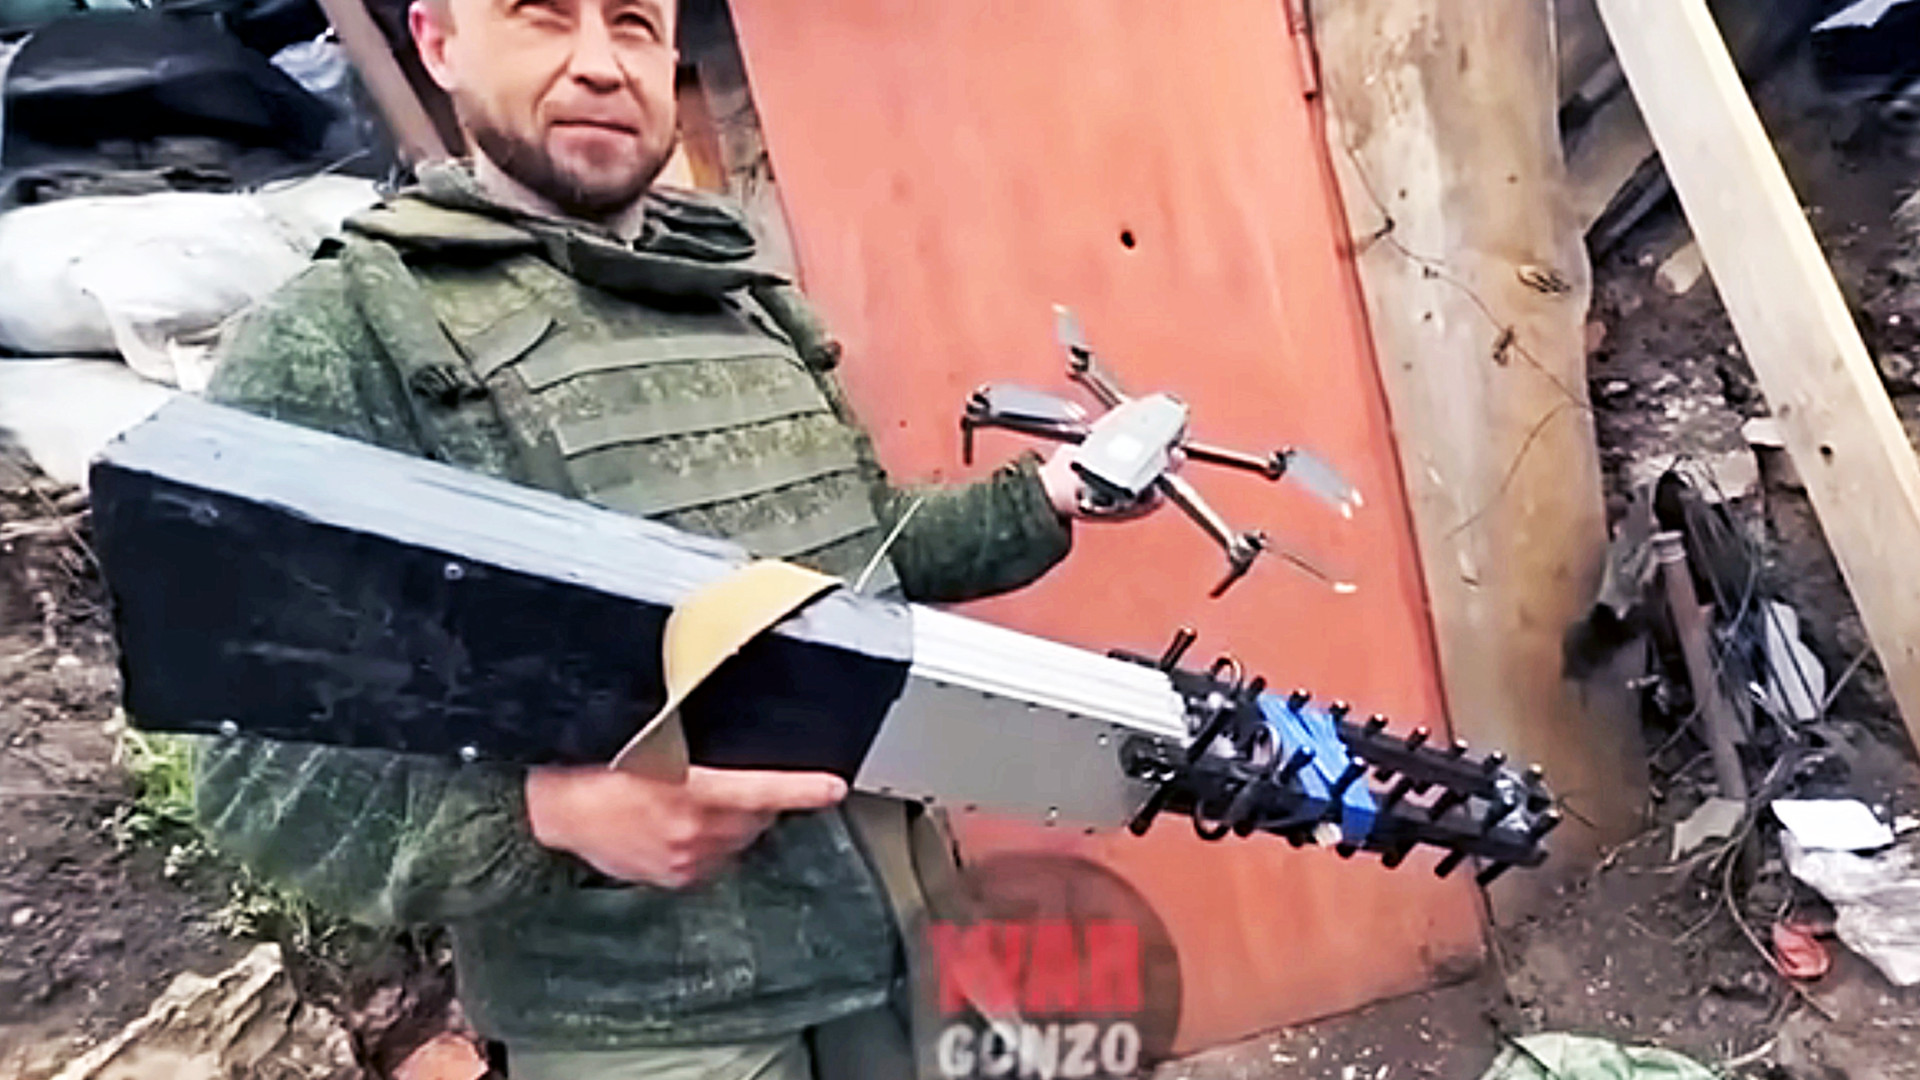 Russian-Backed Separatist Shows Off Homemade Counter-Drone Jamming Gun